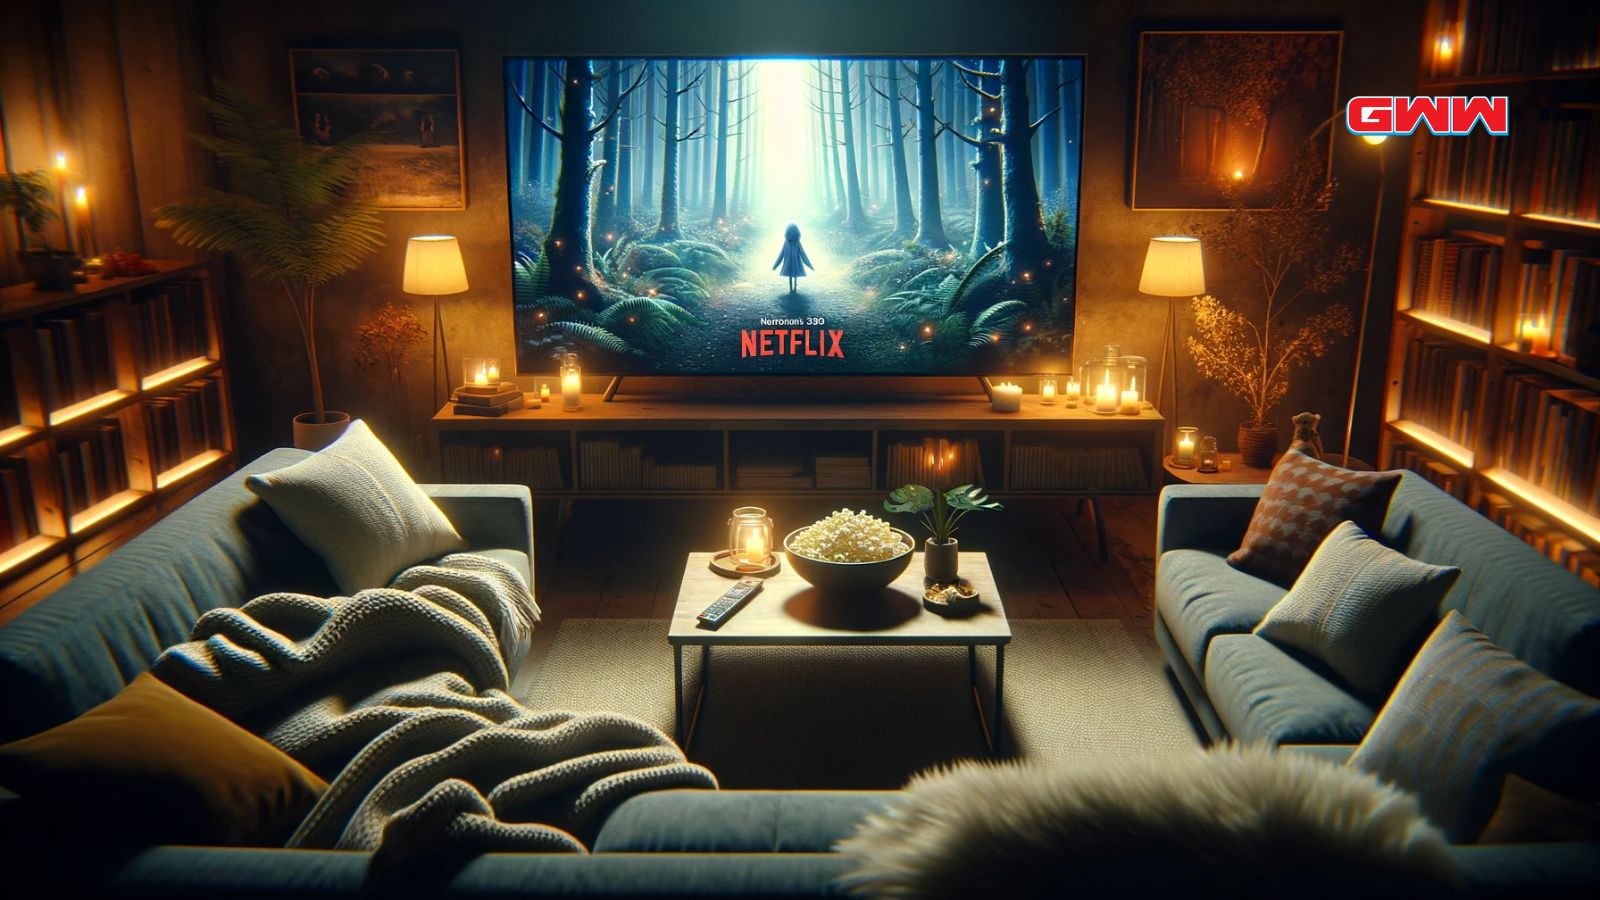 Cozy living room scene at night, designed to evoke the theme of watching a series like 'Frieren' on Netflix